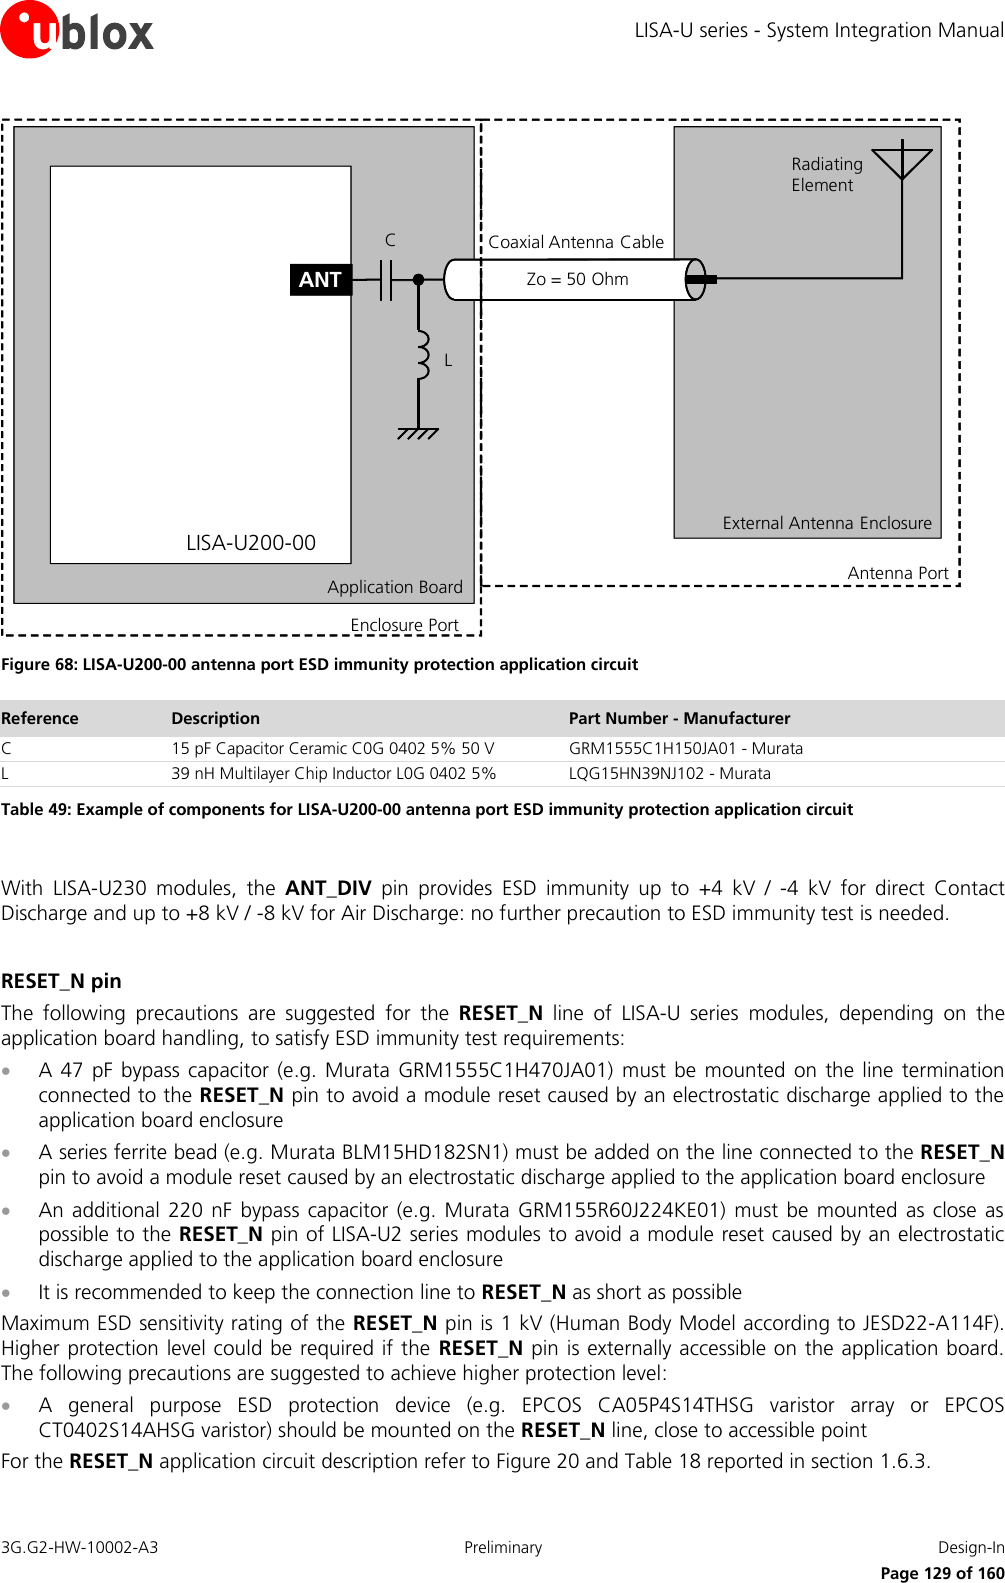 LISA-U series - System Integration Manual 3G.G2-HW-10002-A3  Preliminary  Design-In      Page 129 of 160 External Antenna EnclosureApplication BoardLISA-U200-00ANTRadiating ElementZo = 50 OhmCoaxial Antenna CableAntenna PortEnclosure PortCL Figure 68: LISA-U200-00 antenna port ESD immunity protection application circuit Reference Description Part Number - Manufacturer C 15 pF Capacitor Ceramic C0G 0402 5% 50 V GRM1555C1H150JA01 - Murata L 39 nH Multilayer Chip Inductor L0G 0402 5% LQG15HN39NJ102 - Murata Table 49: Example of components for LISA-U200-00 antenna port ESD immunity protection application circuit  With  LISA-U230  modules,  the  ANT_DIV  pin  provides  ESD  immunity  up  to  +4  kV  /  -4  kV  for  direct  Contact Discharge and up to +8 kV / -8 kV for Air Discharge: no further precaution to ESD immunity test is needed.  RESET_N pin The  following  precautions  are  suggested  for  the  RESET_N  line  of  LISA-U  series  modules,  depending  on  the application board handling, to satisfy ESD immunity test requirements:  A 47  pF bypass capacitor (e.g. Murata GRM1555C1H470JA01)  must be  mounted  on  the line  termination connected to the RESET_N pin to avoid a module reset caused by an electrostatic discharge applied to the application board enclosure  A series ferrite bead (e.g. Murata BLM15HD182SN1) must be added on the line connected to the RESET_N pin to avoid a module reset caused by an electrostatic discharge applied to the application board enclosure  An additional 220  nF bypass  capacitor (e.g. Murata  GRM155R60J224KE01)  must be mounted as  close as possible to the RESET_N pin of LISA-U2 series modules to avoid a module reset caused by an electrostatic discharge applied to the application board enclosure  It is recommended to keep the connection line to RESET_N as short as possible Maximum ESD sensitivity rating of the RESET_N pin is 1 kV (Human Body Model according to JESD22-A114F). Higher protection level could be required if the  RESET_N pin is externally accessible on the application board. The following precautions are suggested to achieve higher protection level:  A  general  purpose  ESD  protection  device  (e.g.  EPCOS  CA05P4S14THSG  varistor  array  or  EPCOS CT0402S14AHSG varistor) should be mounted on the RESET_N line, close to accessible point For the RESET_N application circuit description refer to Figure 20 and Table 18 reported in section 1.6.3. 